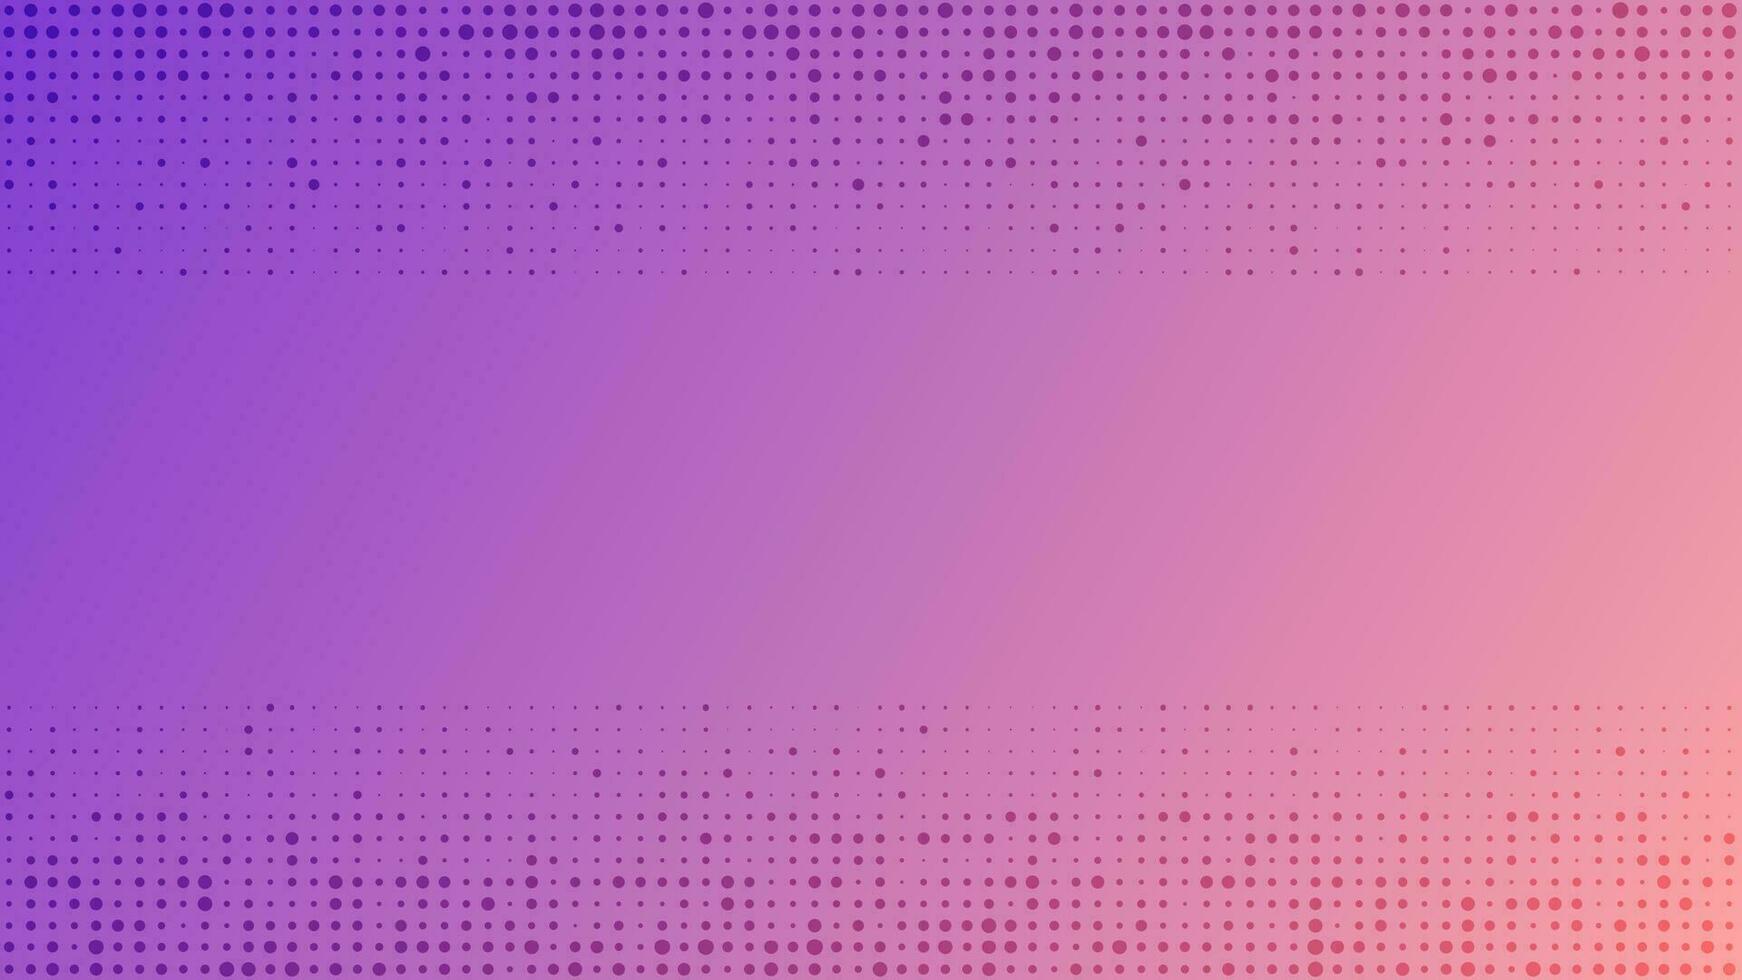 Abstract geometric gradient circles background. Violet dot background with empty space. Vector illustration.